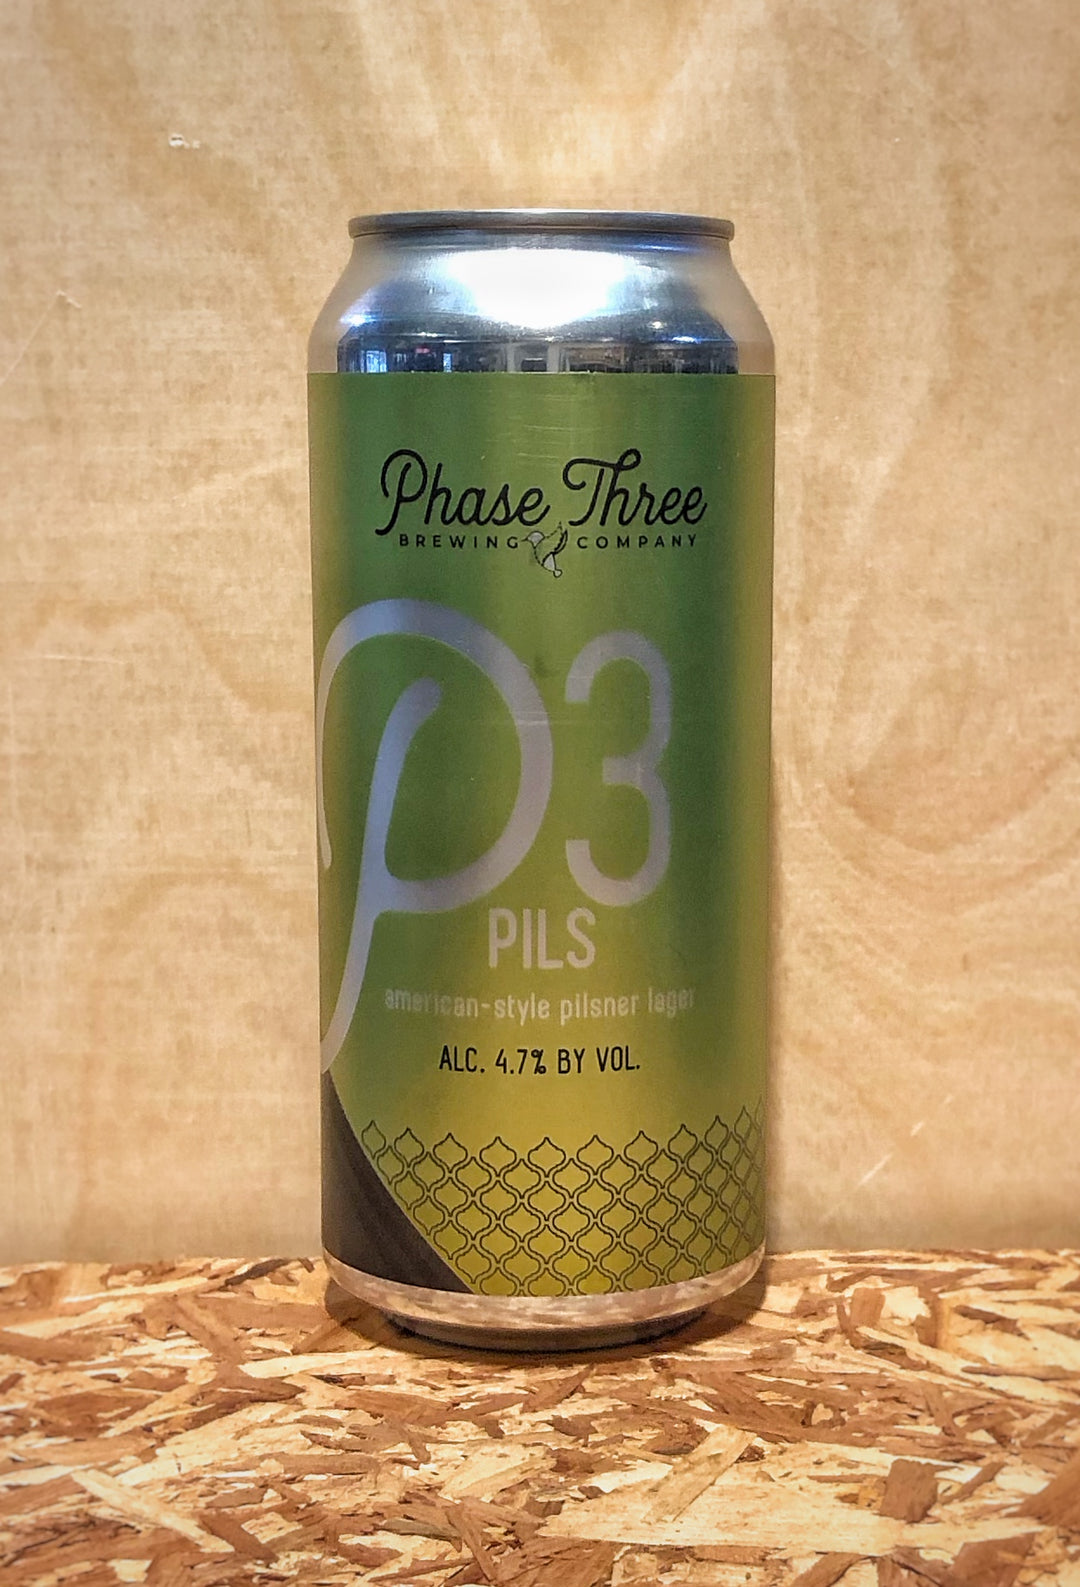 Phase Three Brewing Co. 'P3 Pils' American-Style Pilsner Lager (Lake Zurich, IL)